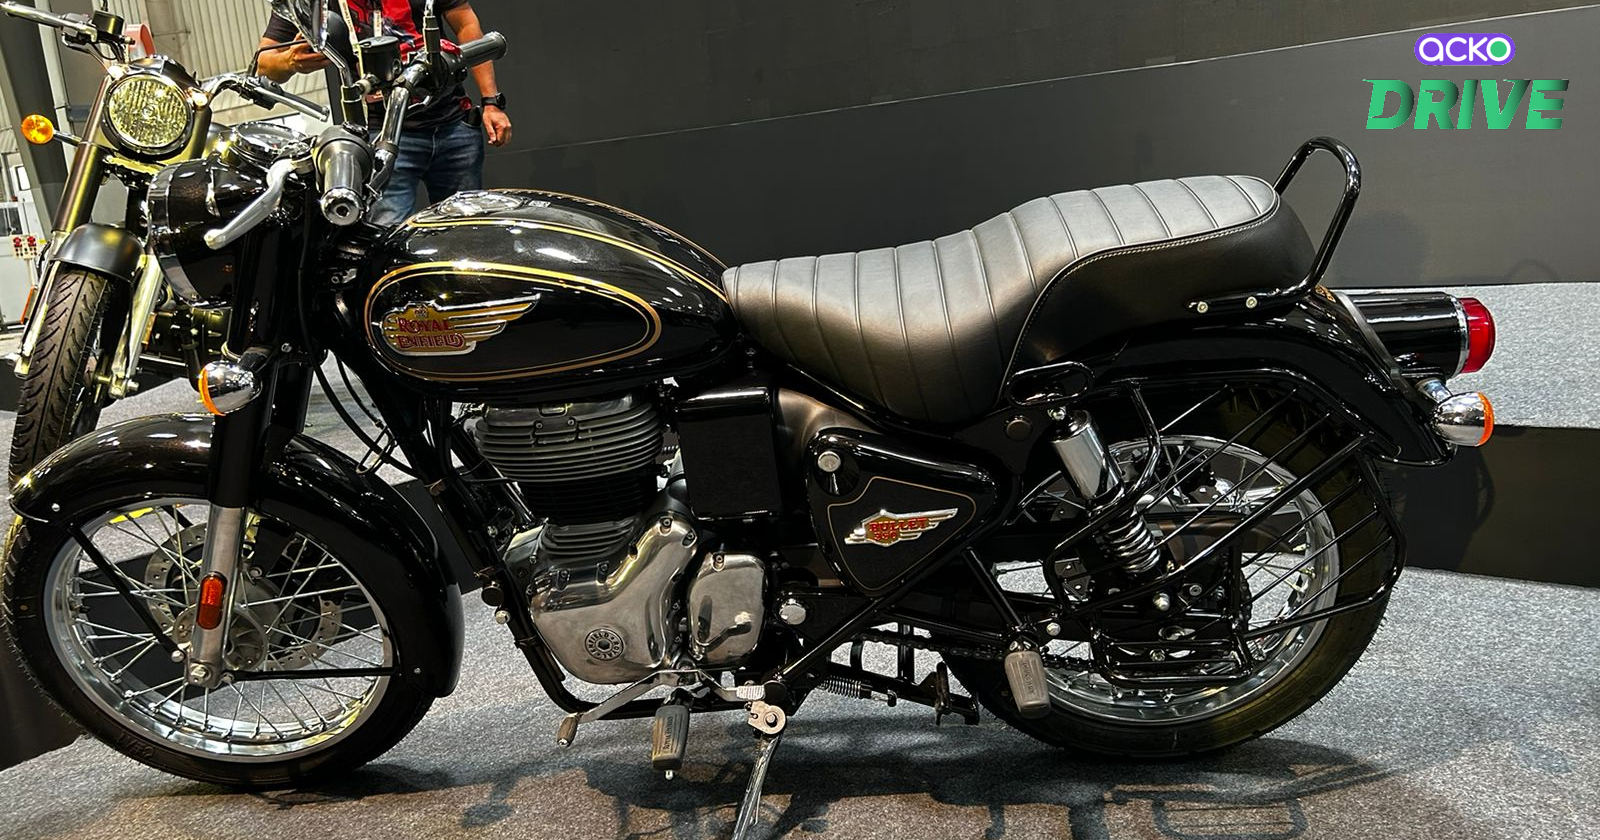 All-New Royal Enfield Bullet 350 Launched in India; Price Starts at Rs 1.74  Lakh - News18